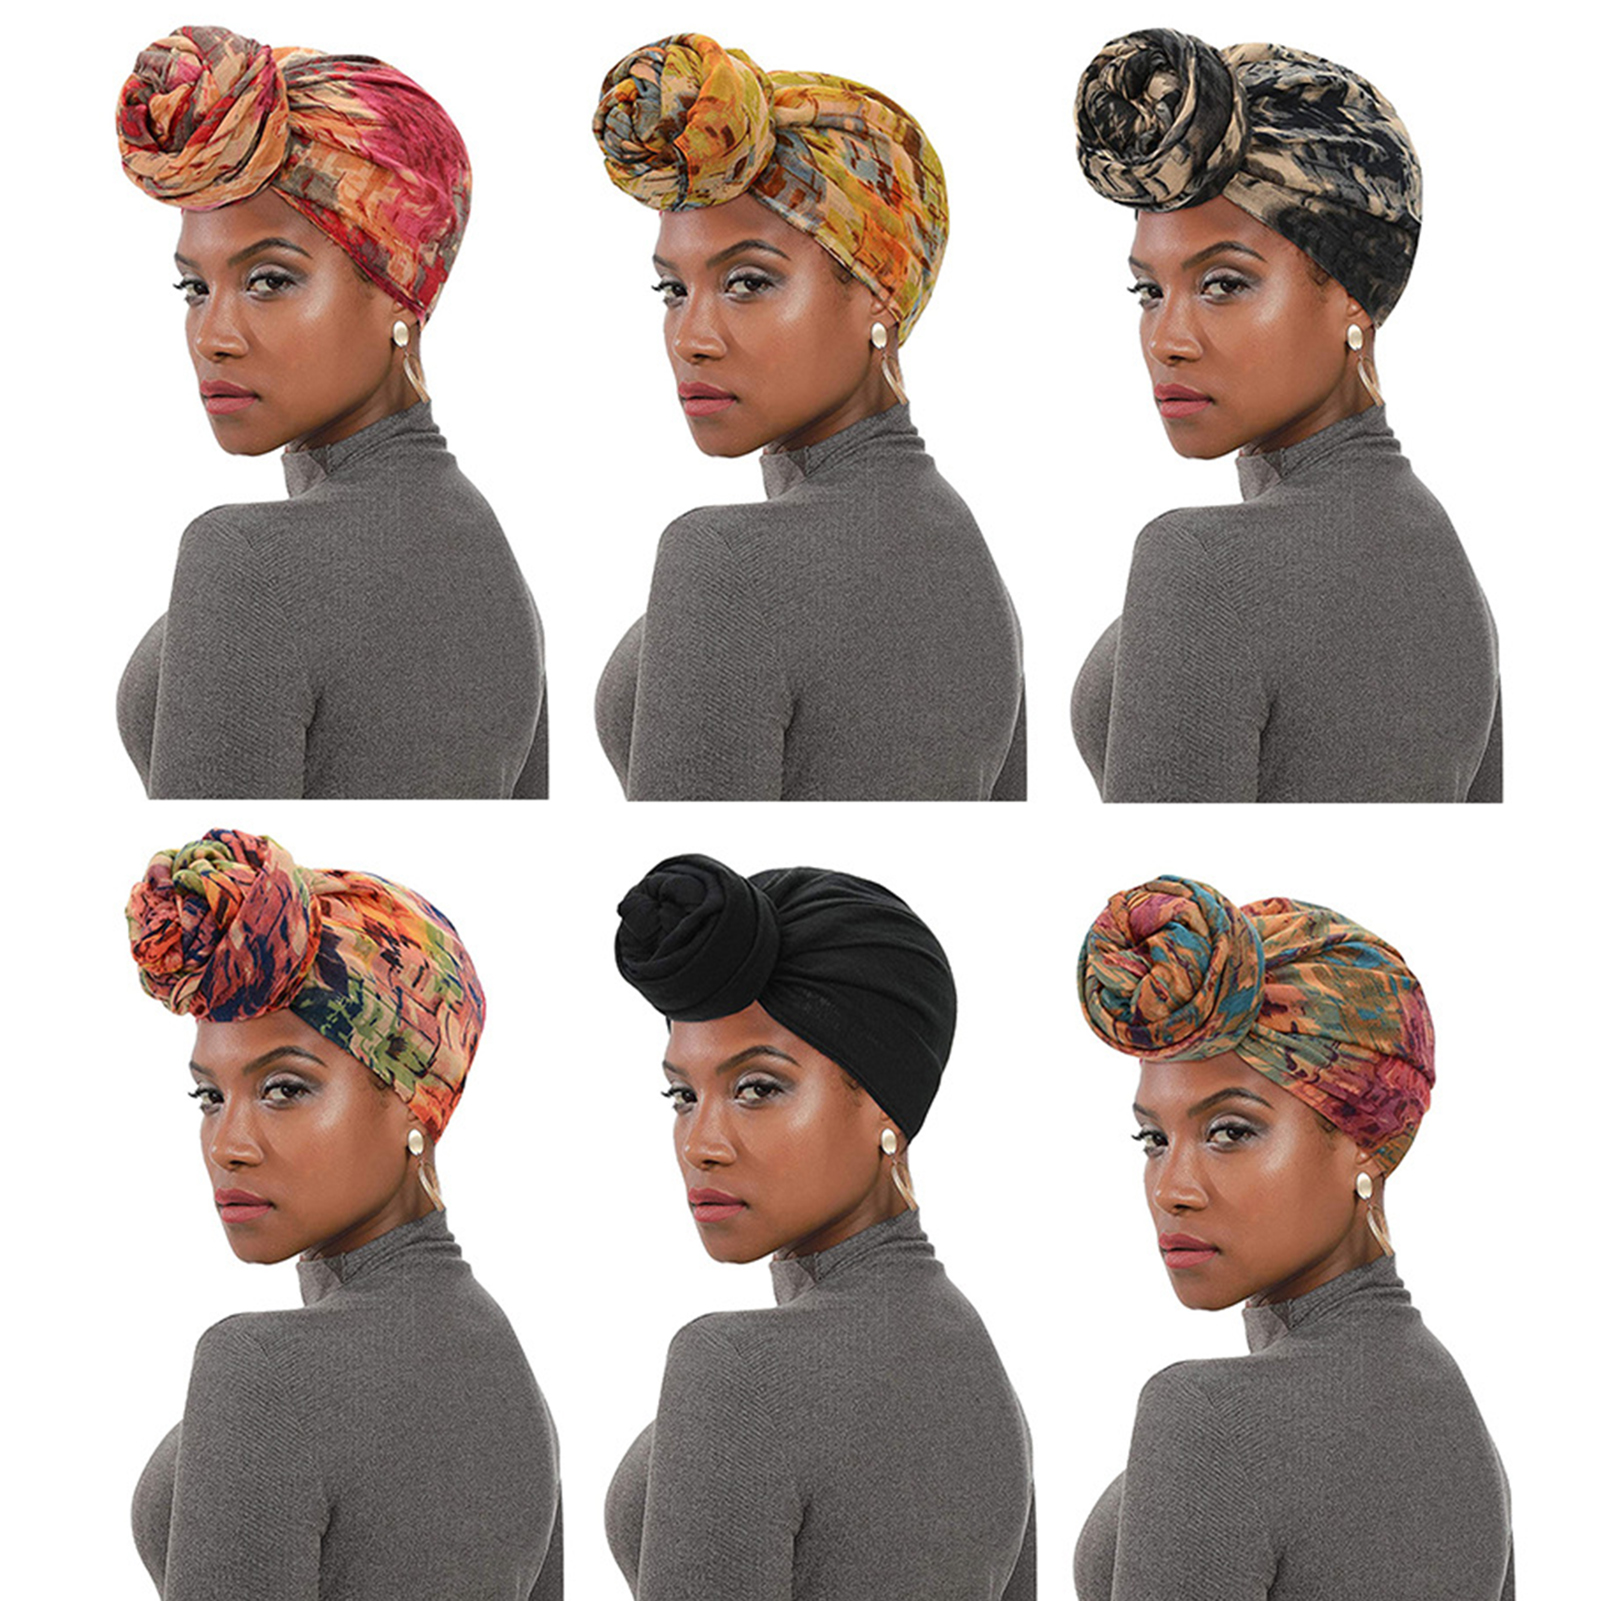 Hesroicy Long Breathable Ultra Soft Turban Head Wrap Stretchy Elastic Full Coverage Floral Print Hair Wrap Scarf for Women - image 1 of 8